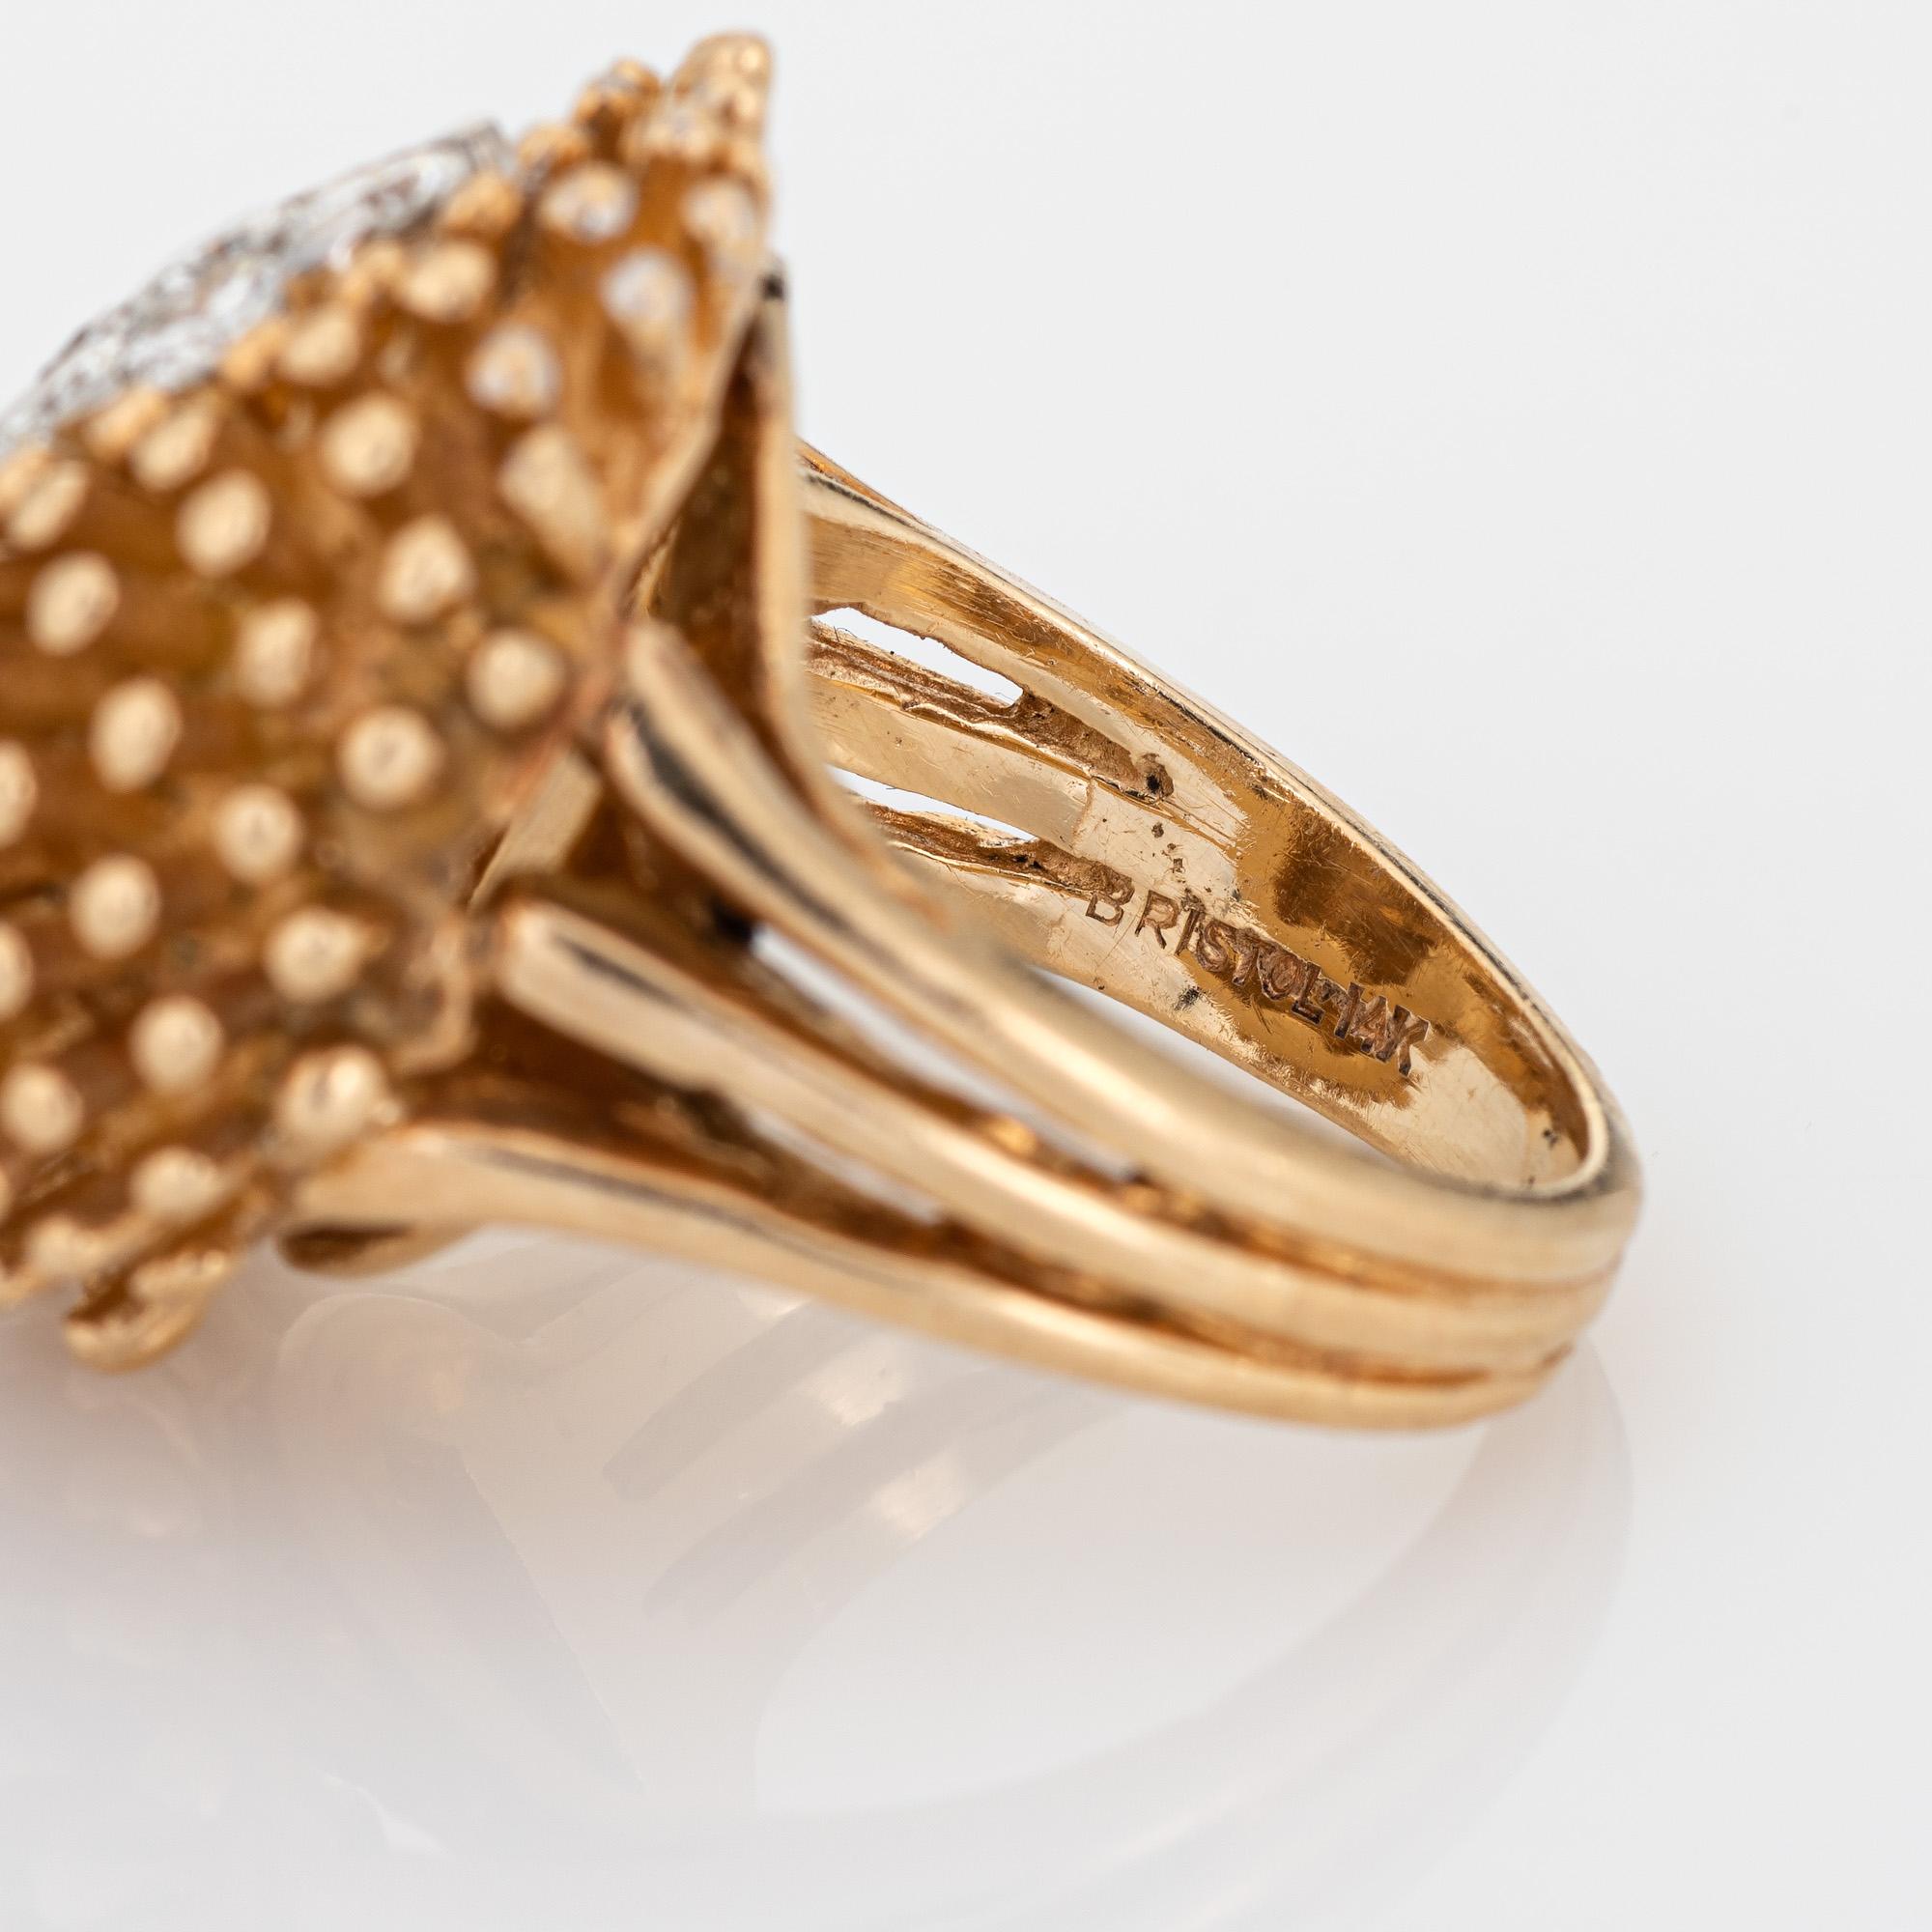 Sea Urchin Diamond Ring Vintage 14k Yellow Gold Marine Ocean Fine Jewelry In Good Condition For Sale In Torrance, CA